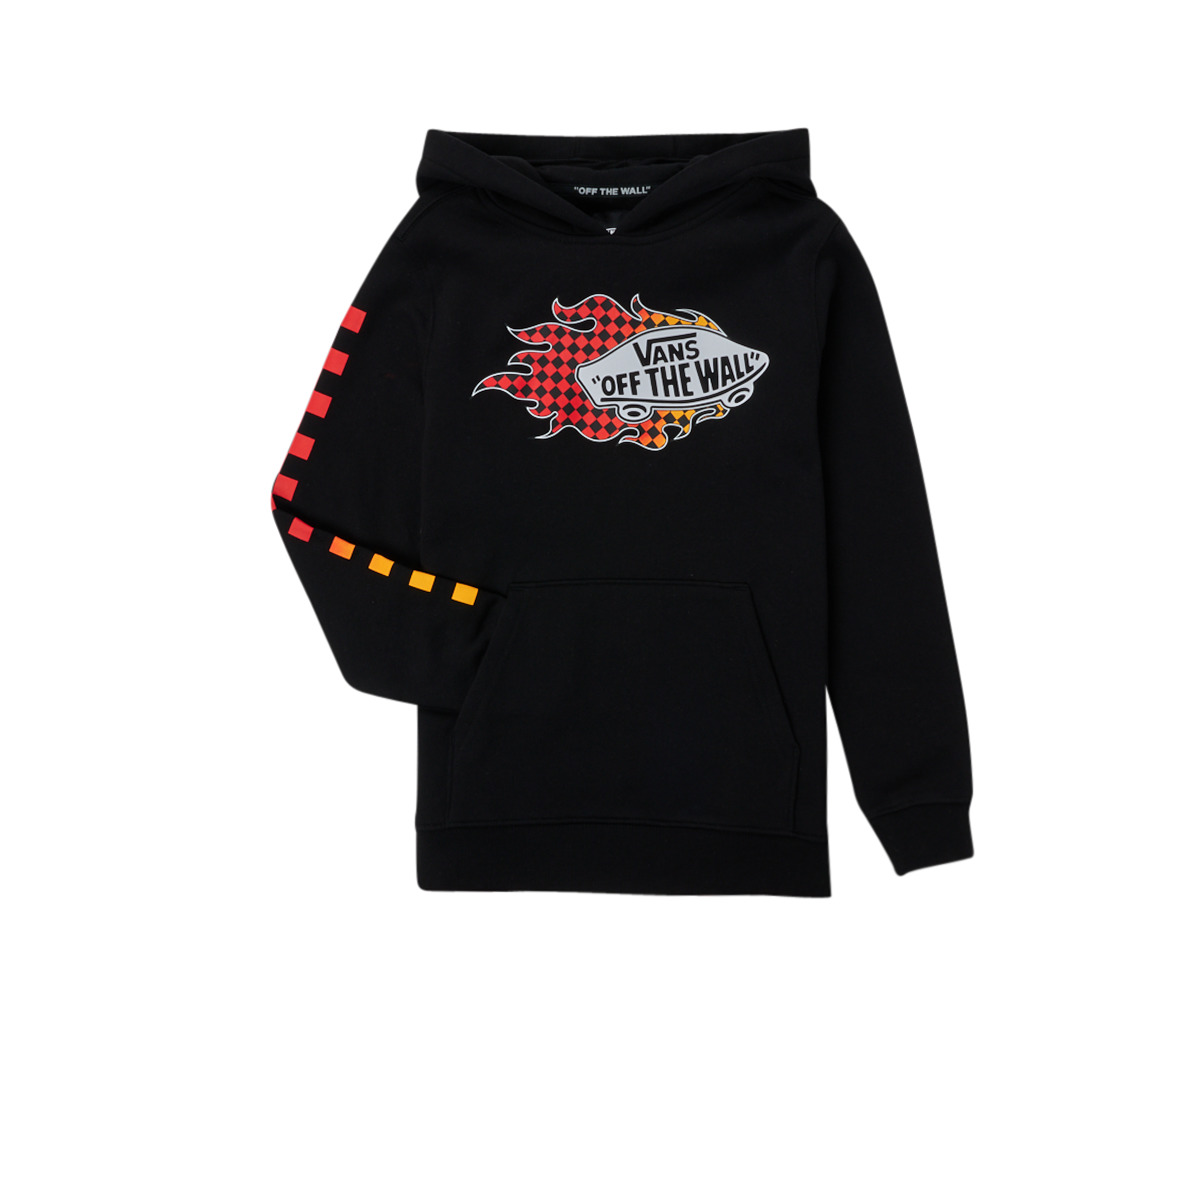 Vans LOGO PO Black - Free delivery | Spartoo NET ! - Clothing sweaters  Child